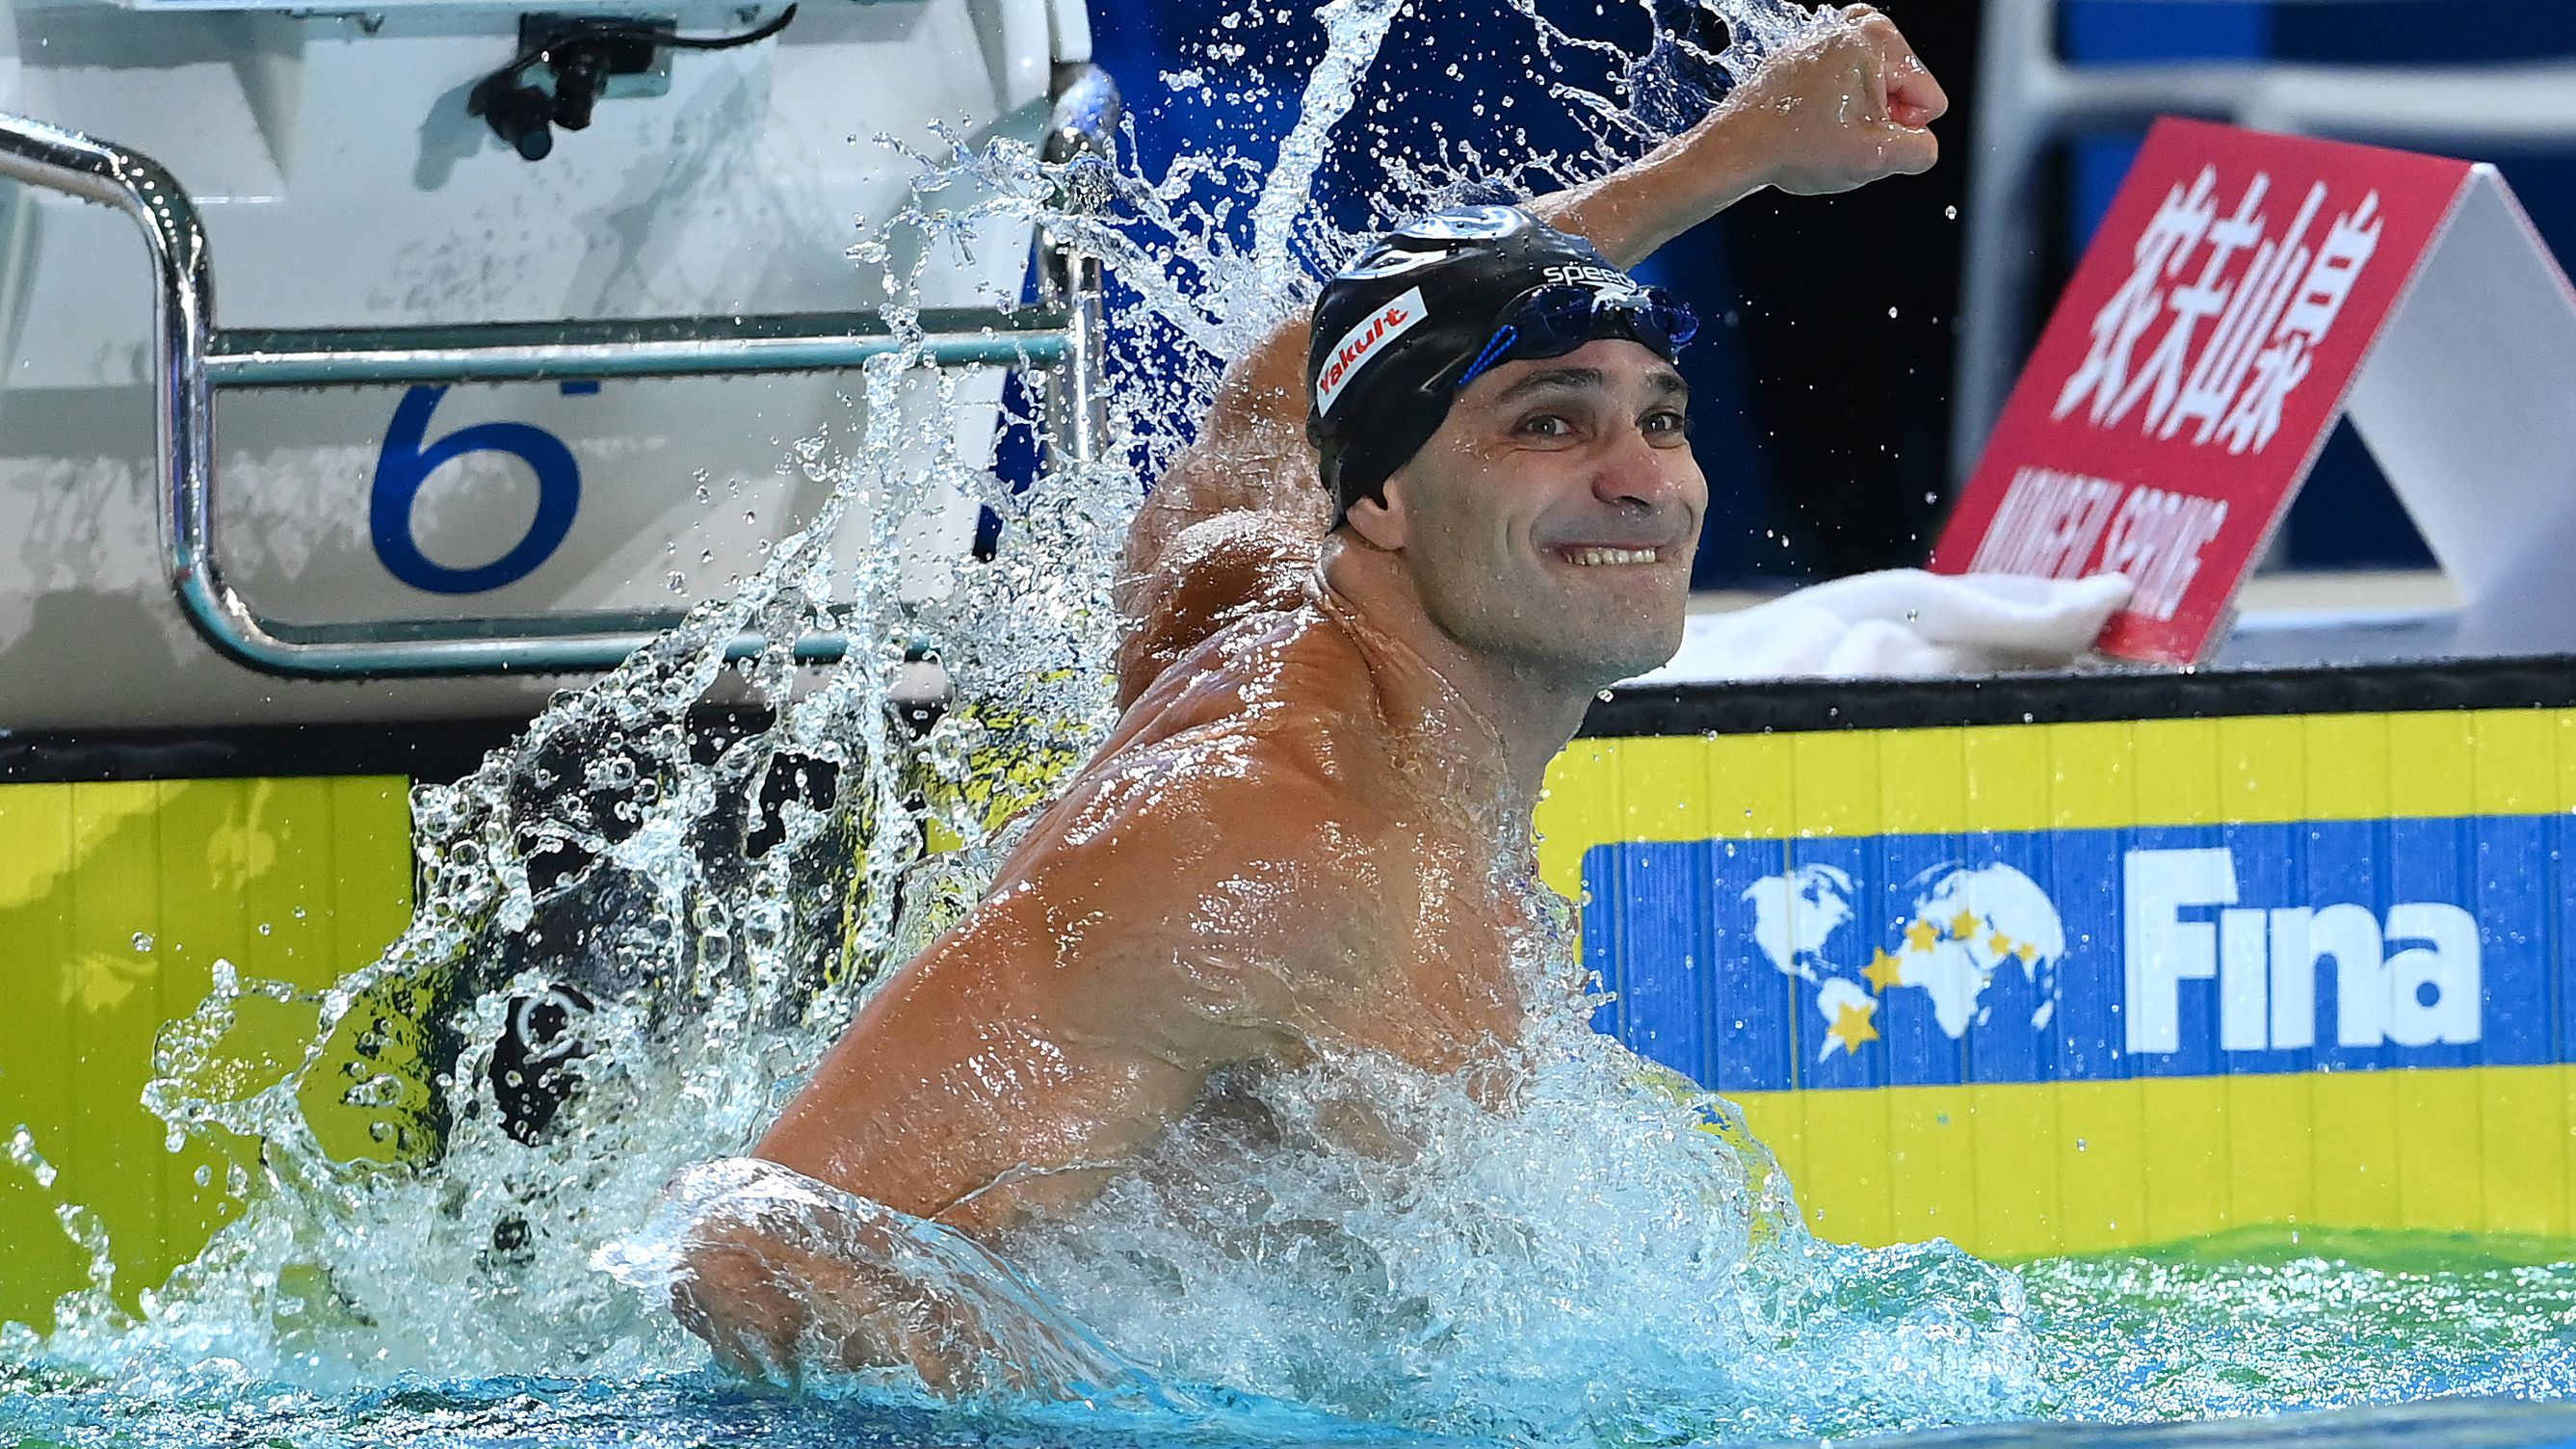 Forty-two-year-old Nicholas Santos claims gold, championship record in men's 50m butterfly final